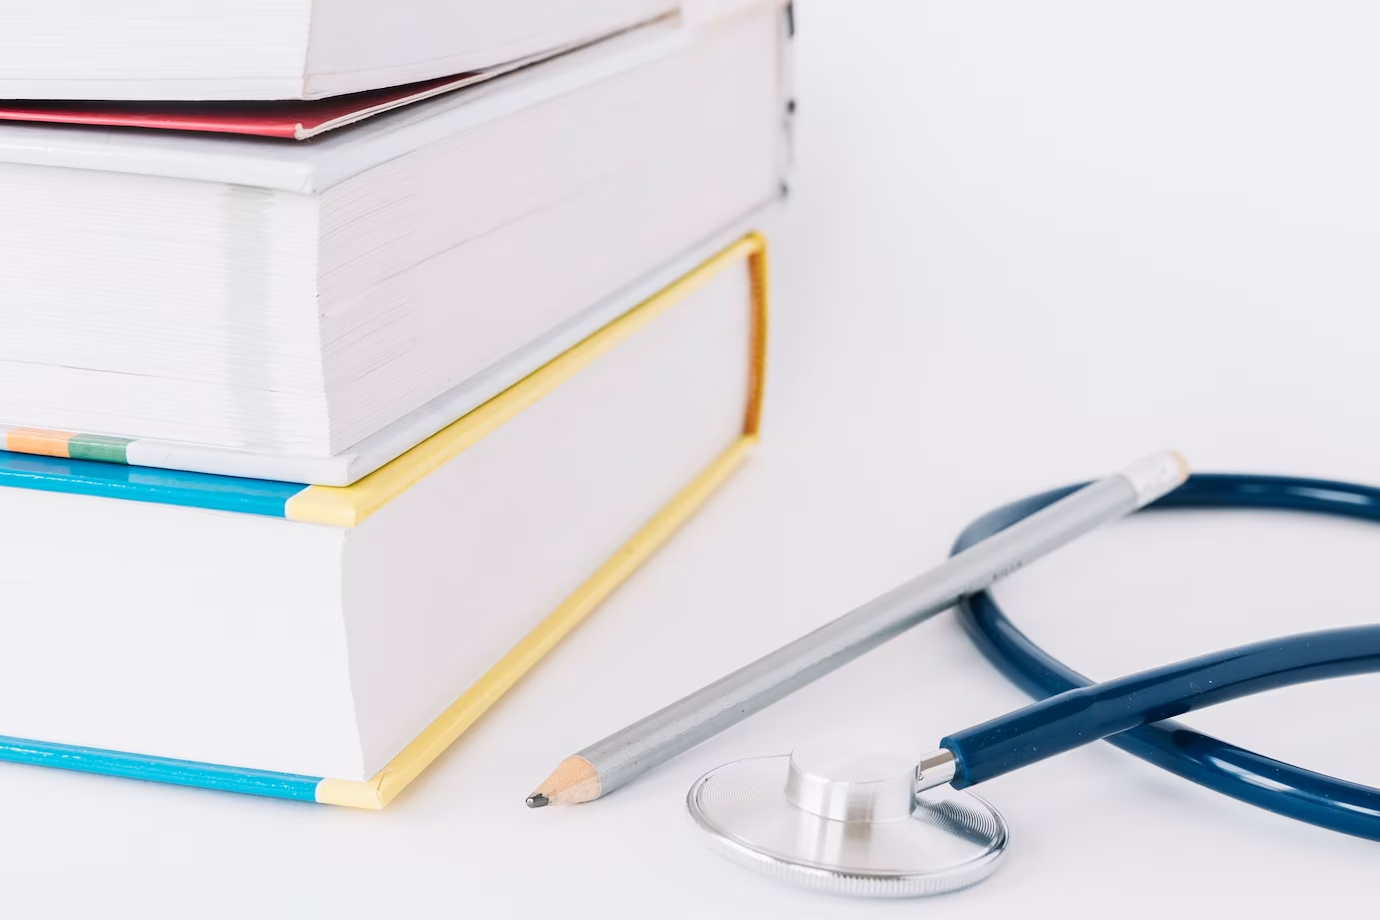 Stacked books, pencil, and stethoscope on a white surface – Top pre-med subjects for a medicine career.